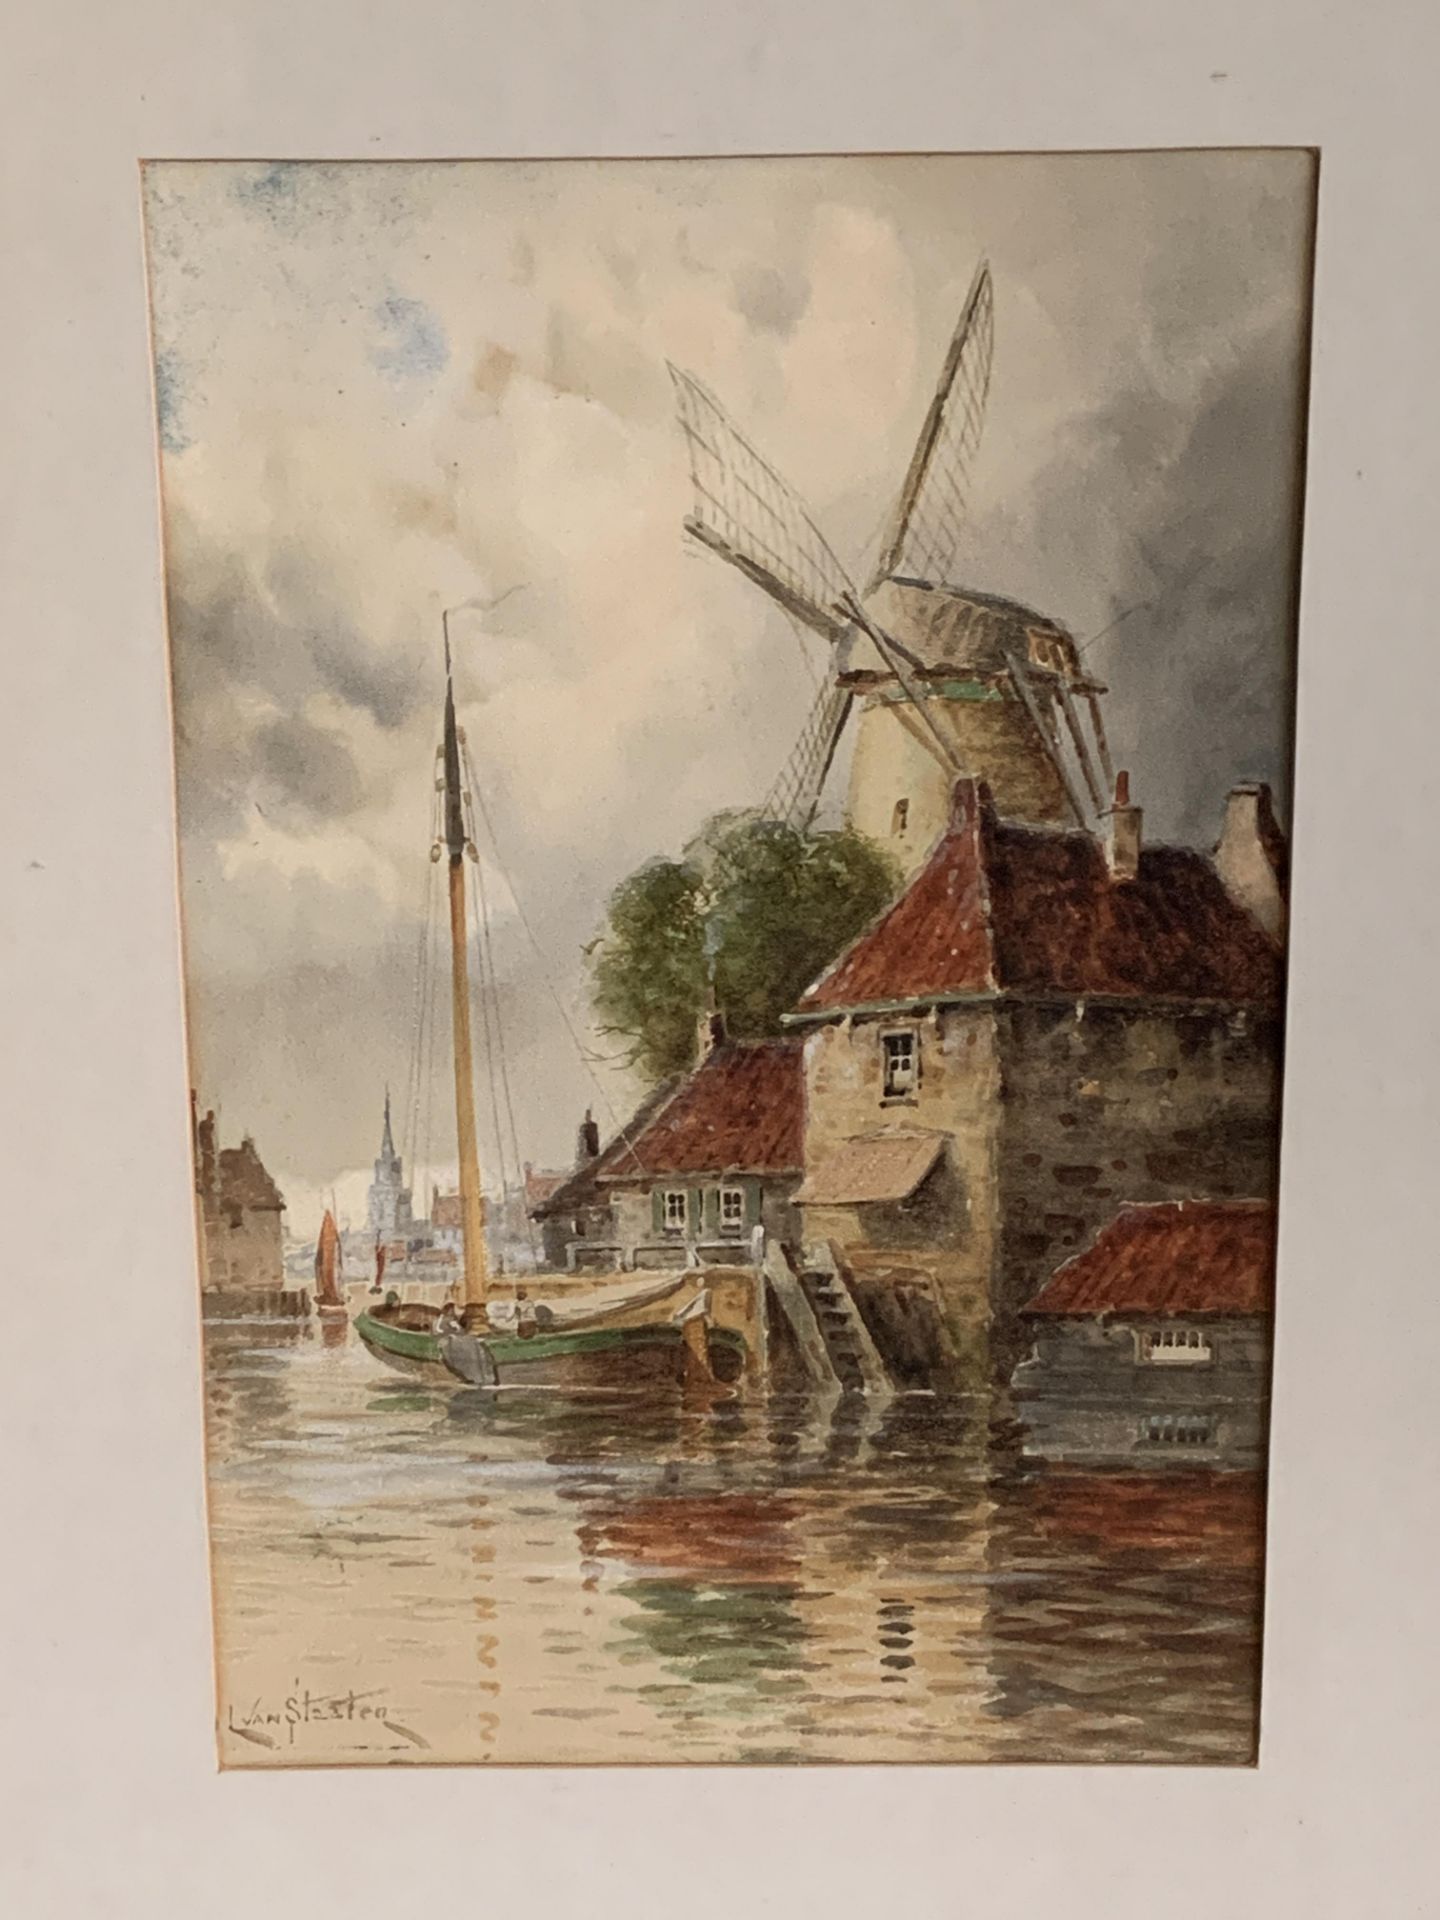 Framed and glazed watercolour, signed L van Staaten